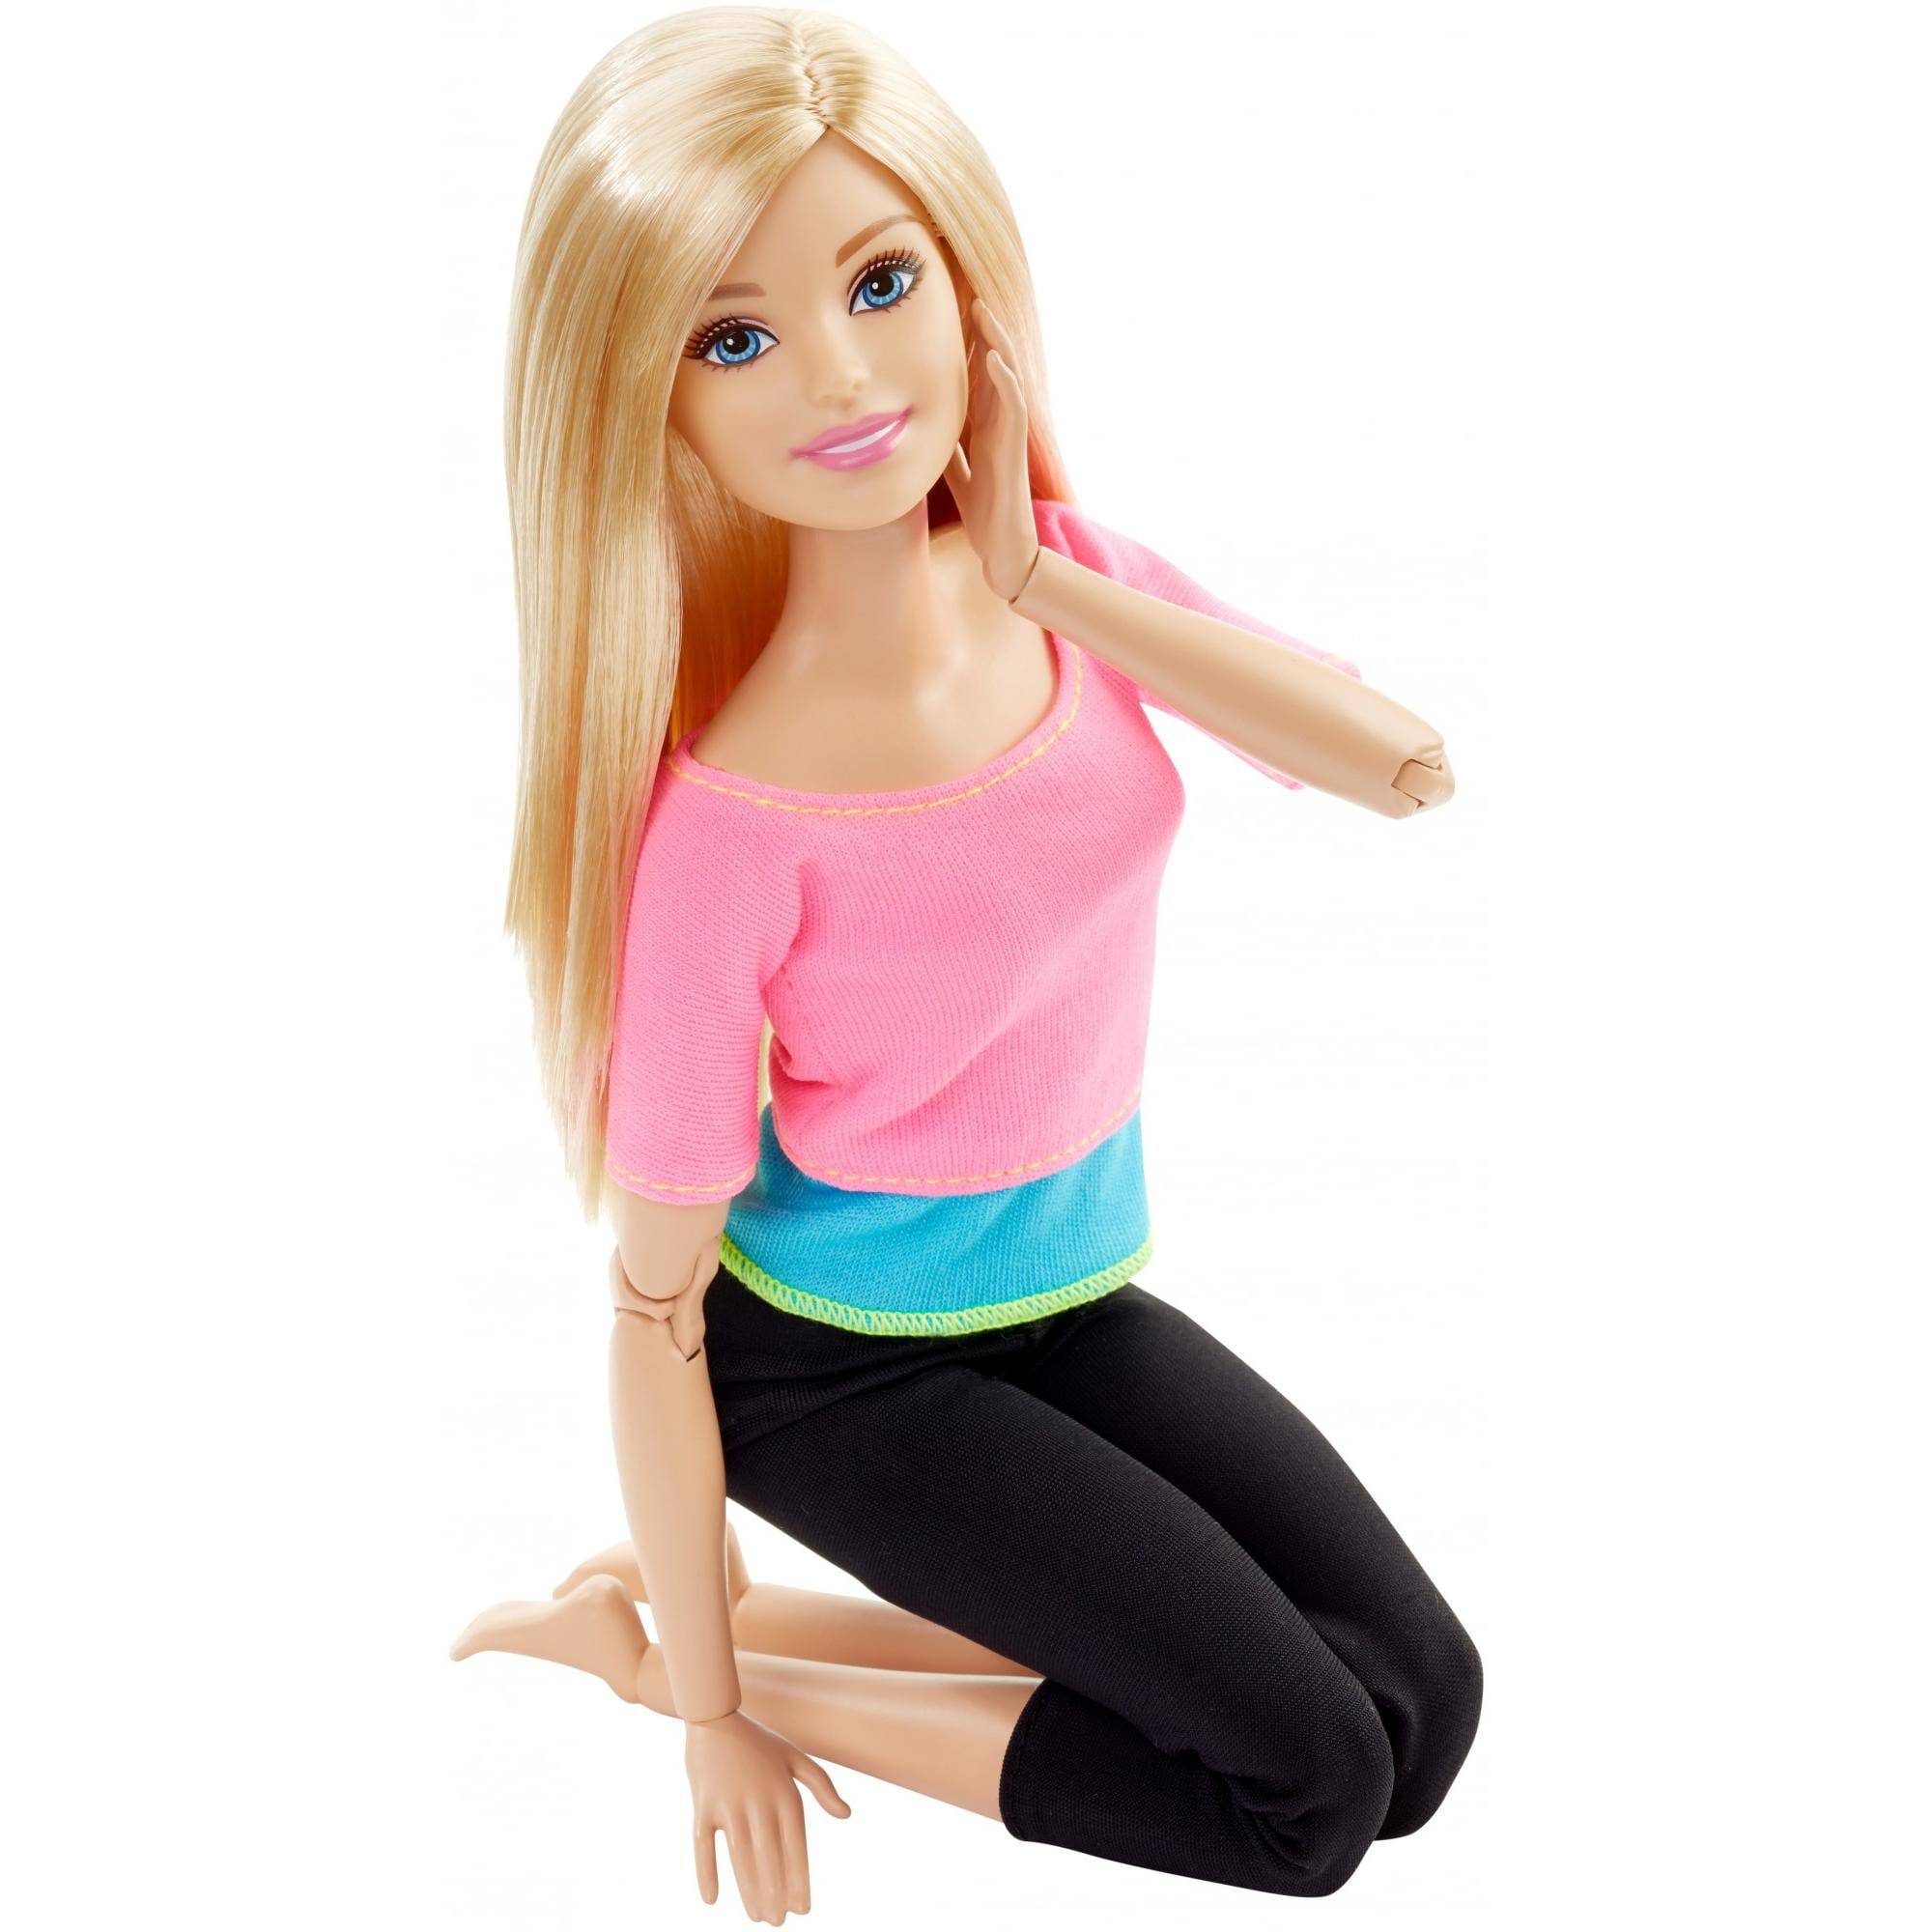 Barbie Endless Moves Doll, Pink Top